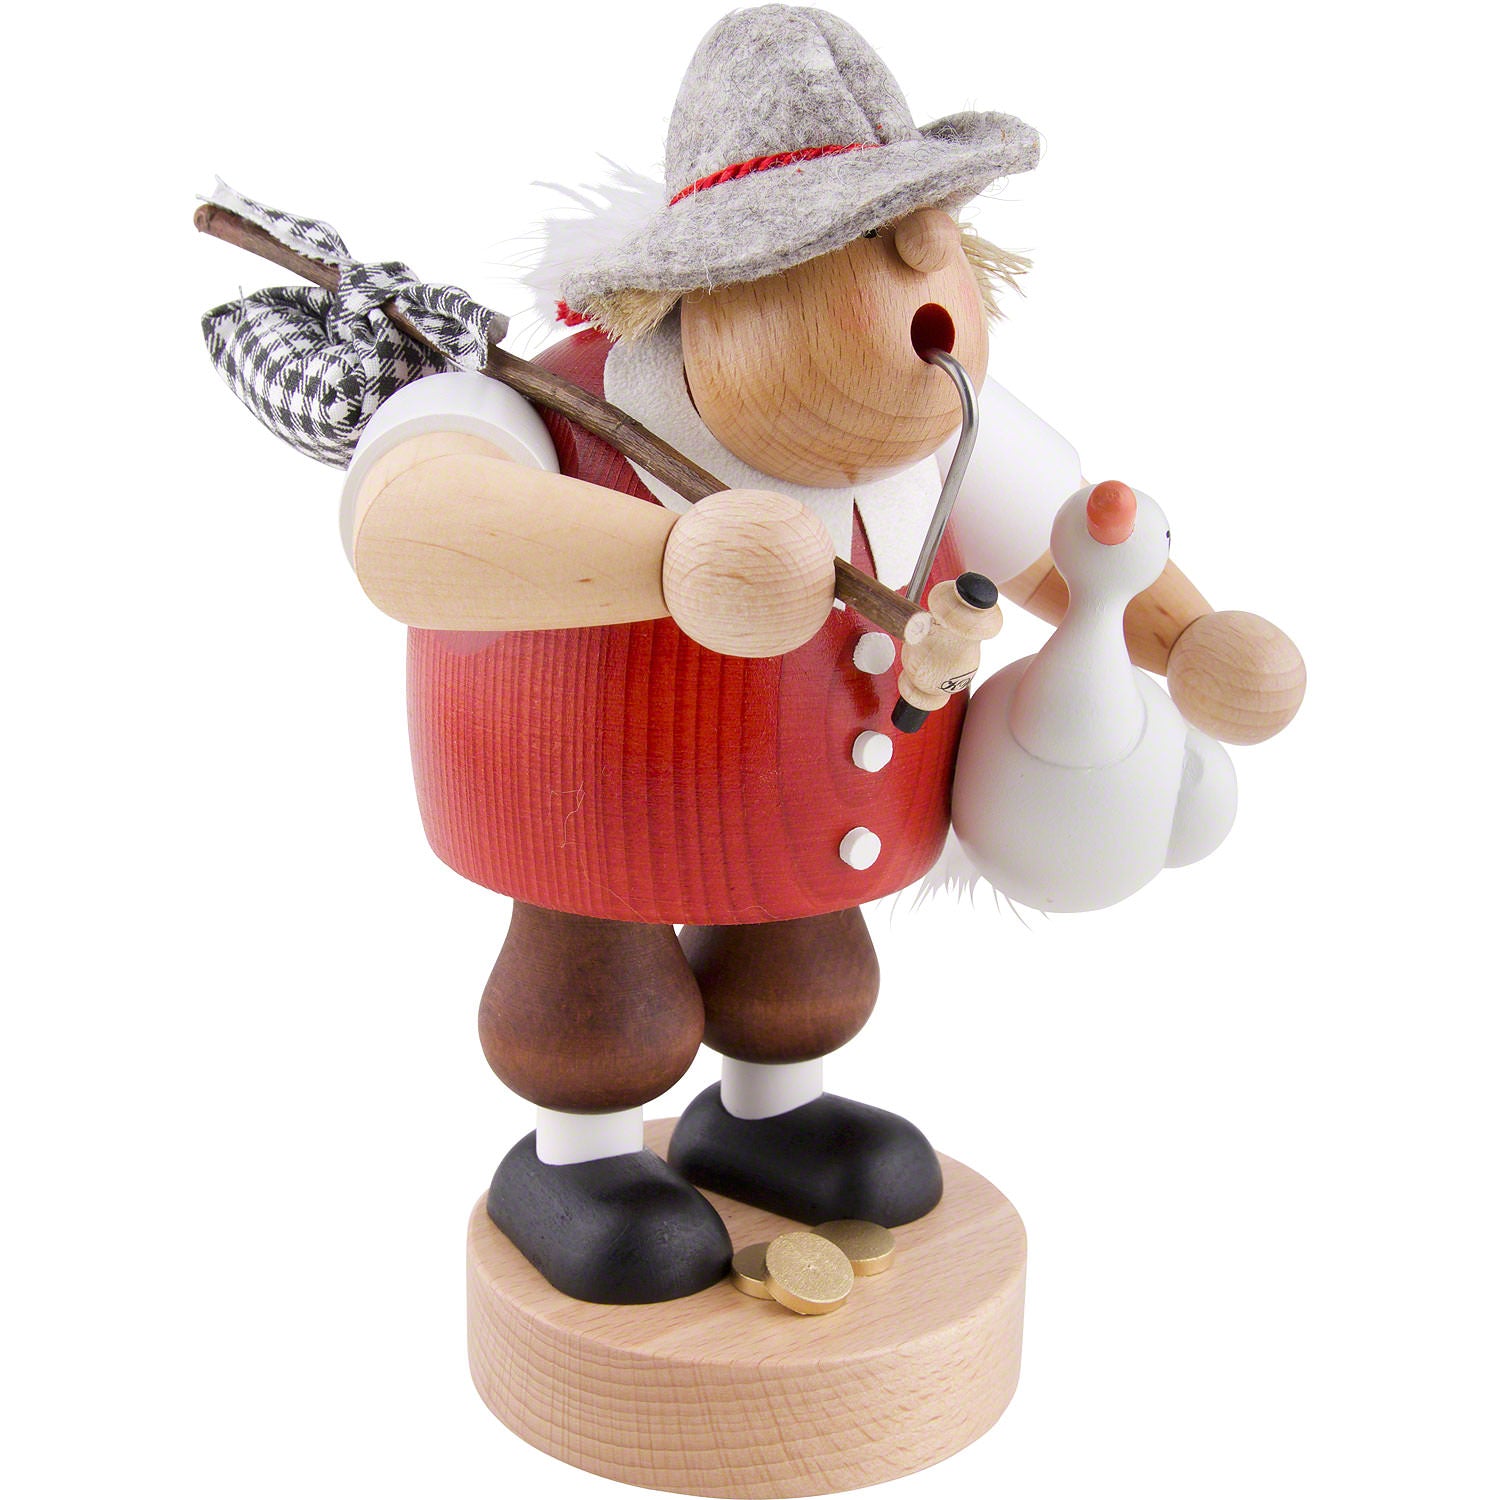 Hans in Luck Incense Smoker by KWO